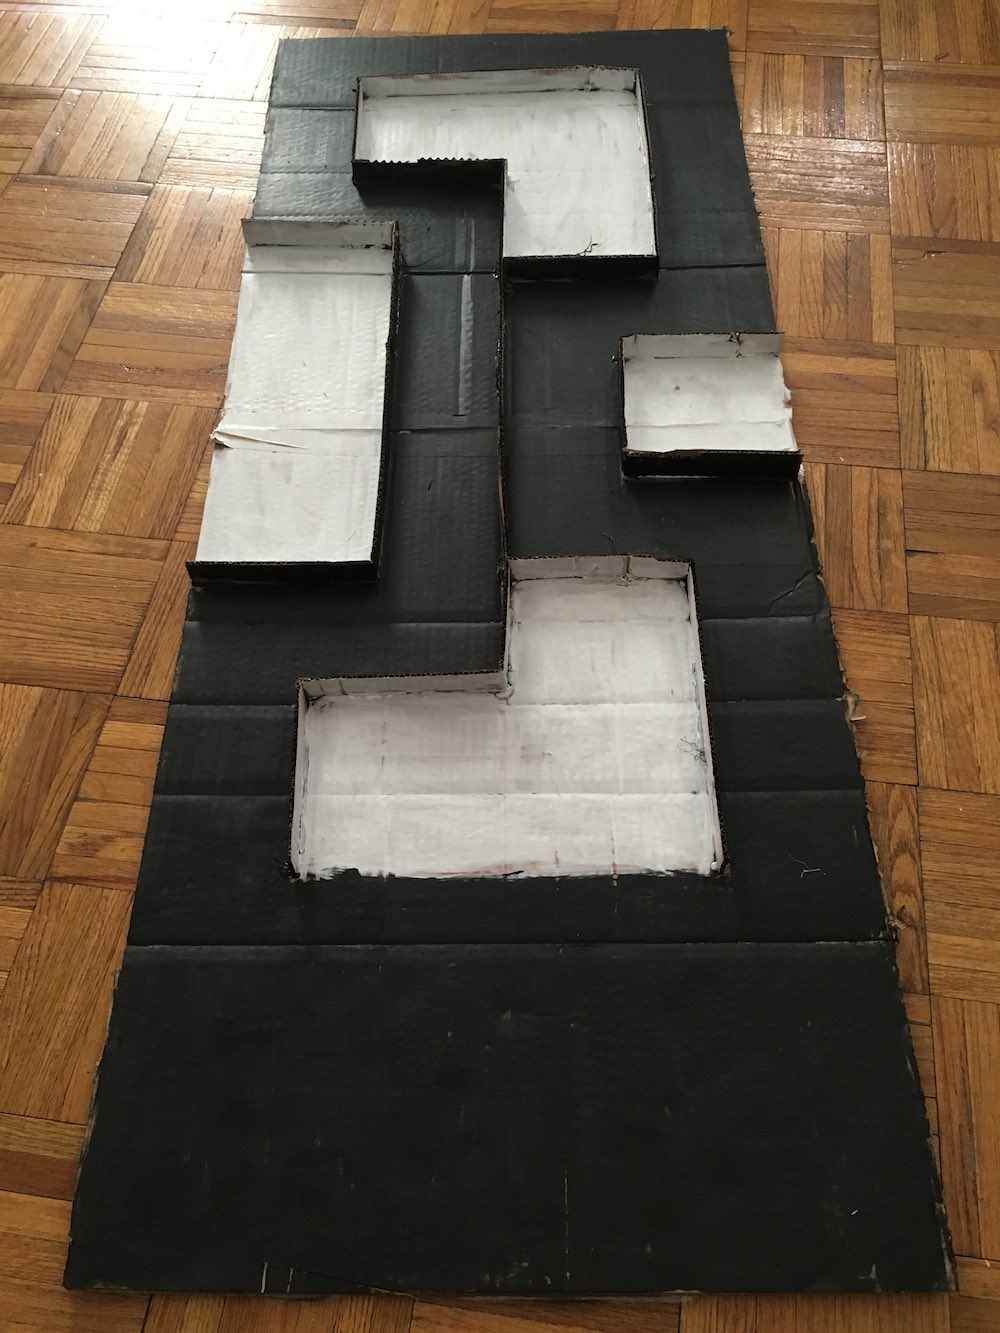 A mockup of the previously-pictured path made of short strips of cardboard glued together to form walls